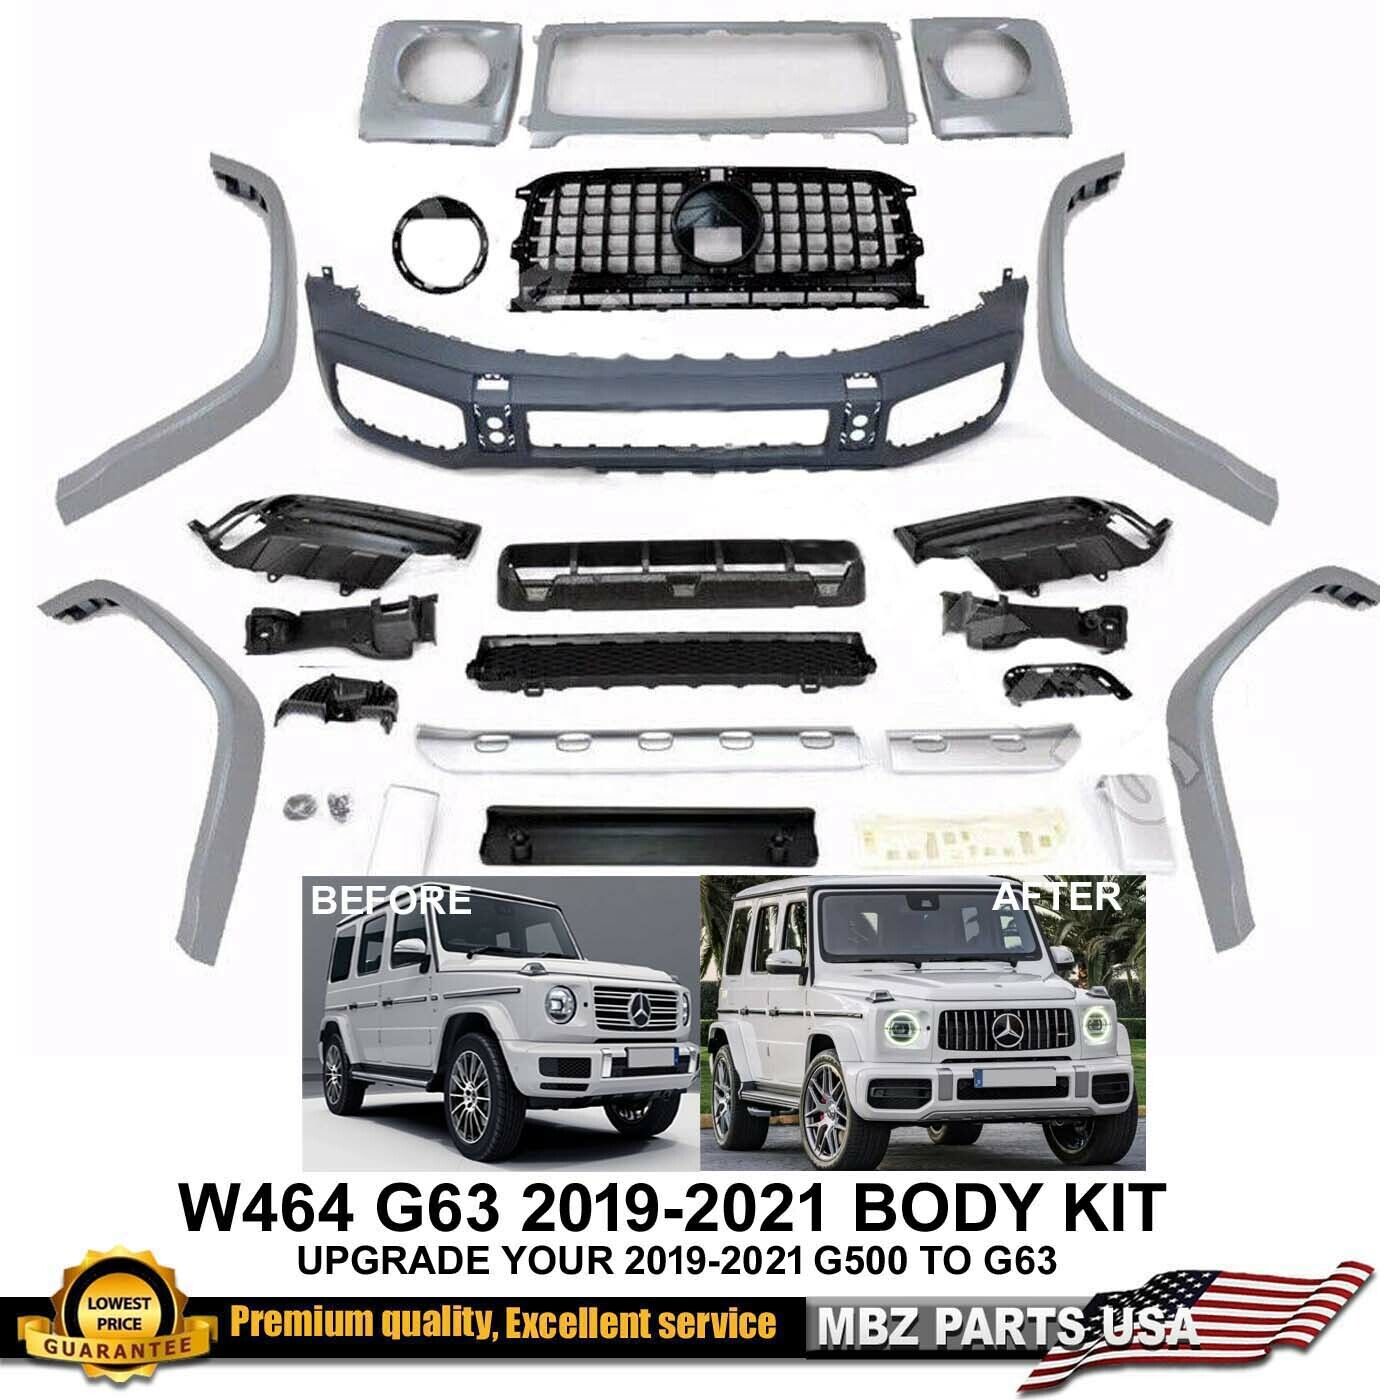 2019 2020 G63 STYLE AMG BODY KIT BUMPER GRILLE FACELIFT UPGRADE W464 G500 G550